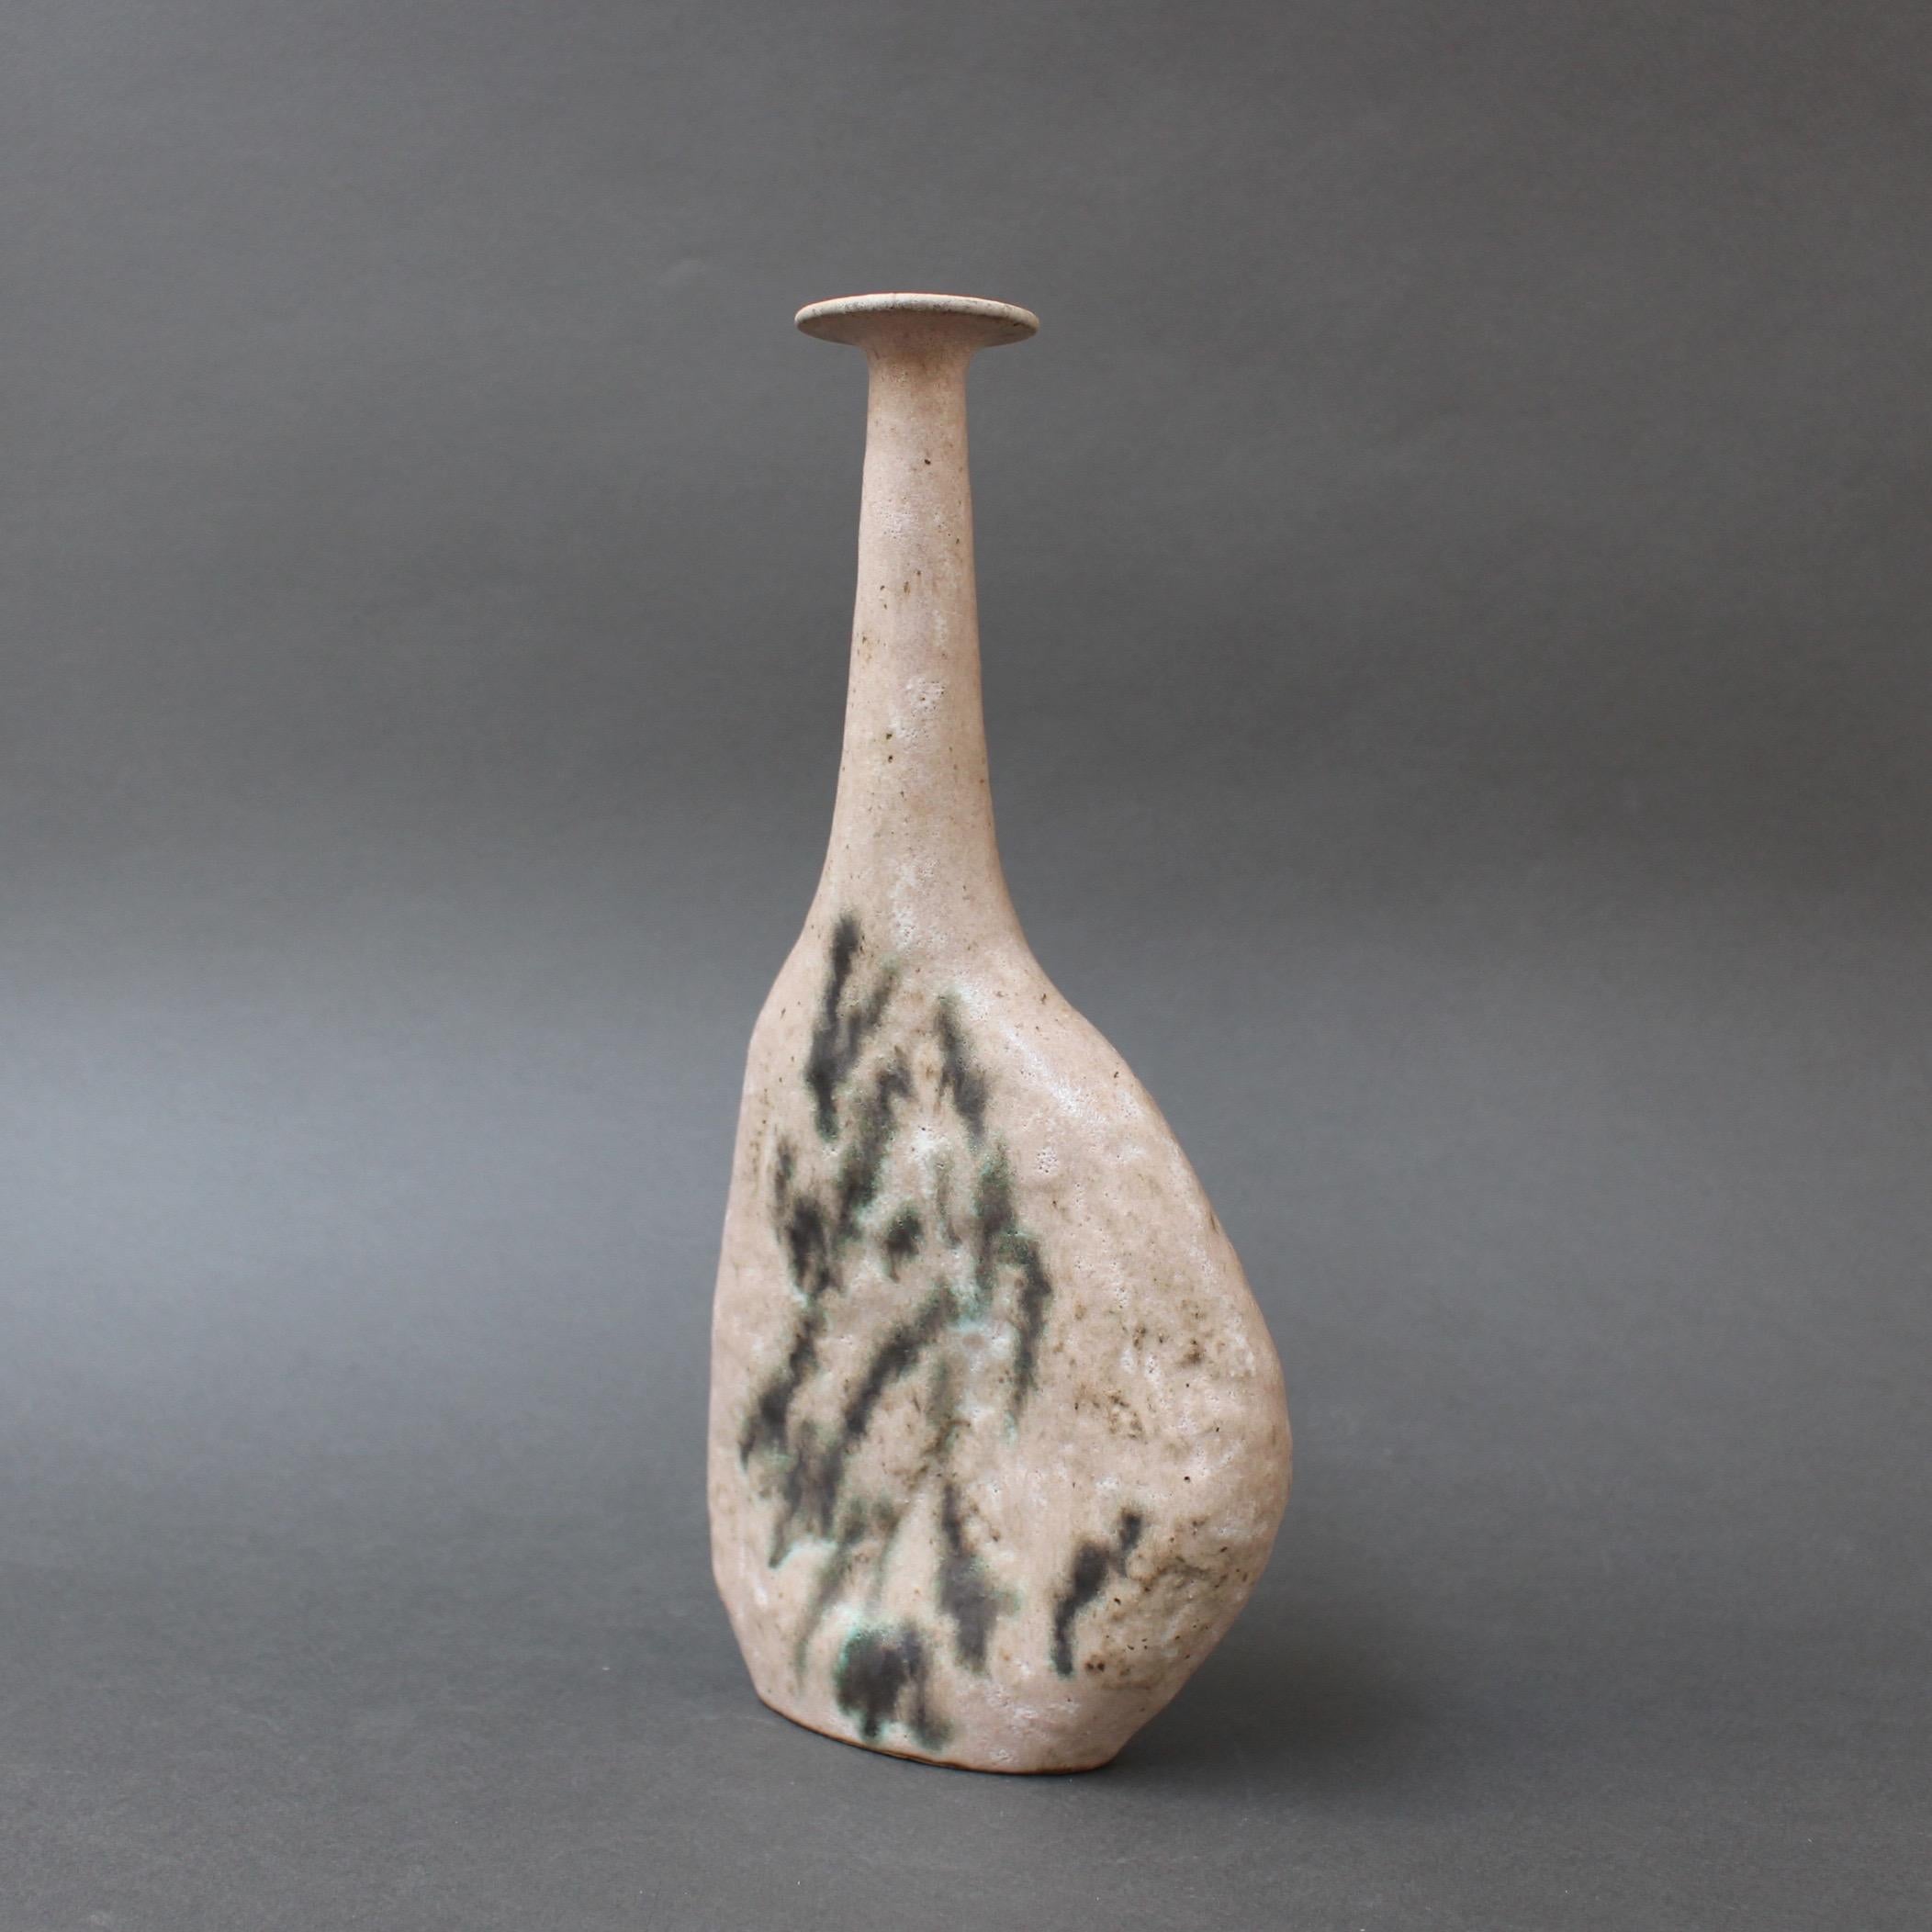 Stoneware Sassi model primitive style vase with dusty light rose glaze by ceramicist Bruno Gambone, circa 1980s. This graceful narrow-opening flower vase is a work of art. The elegant base is very tactile, its subtle colouring is marked with a